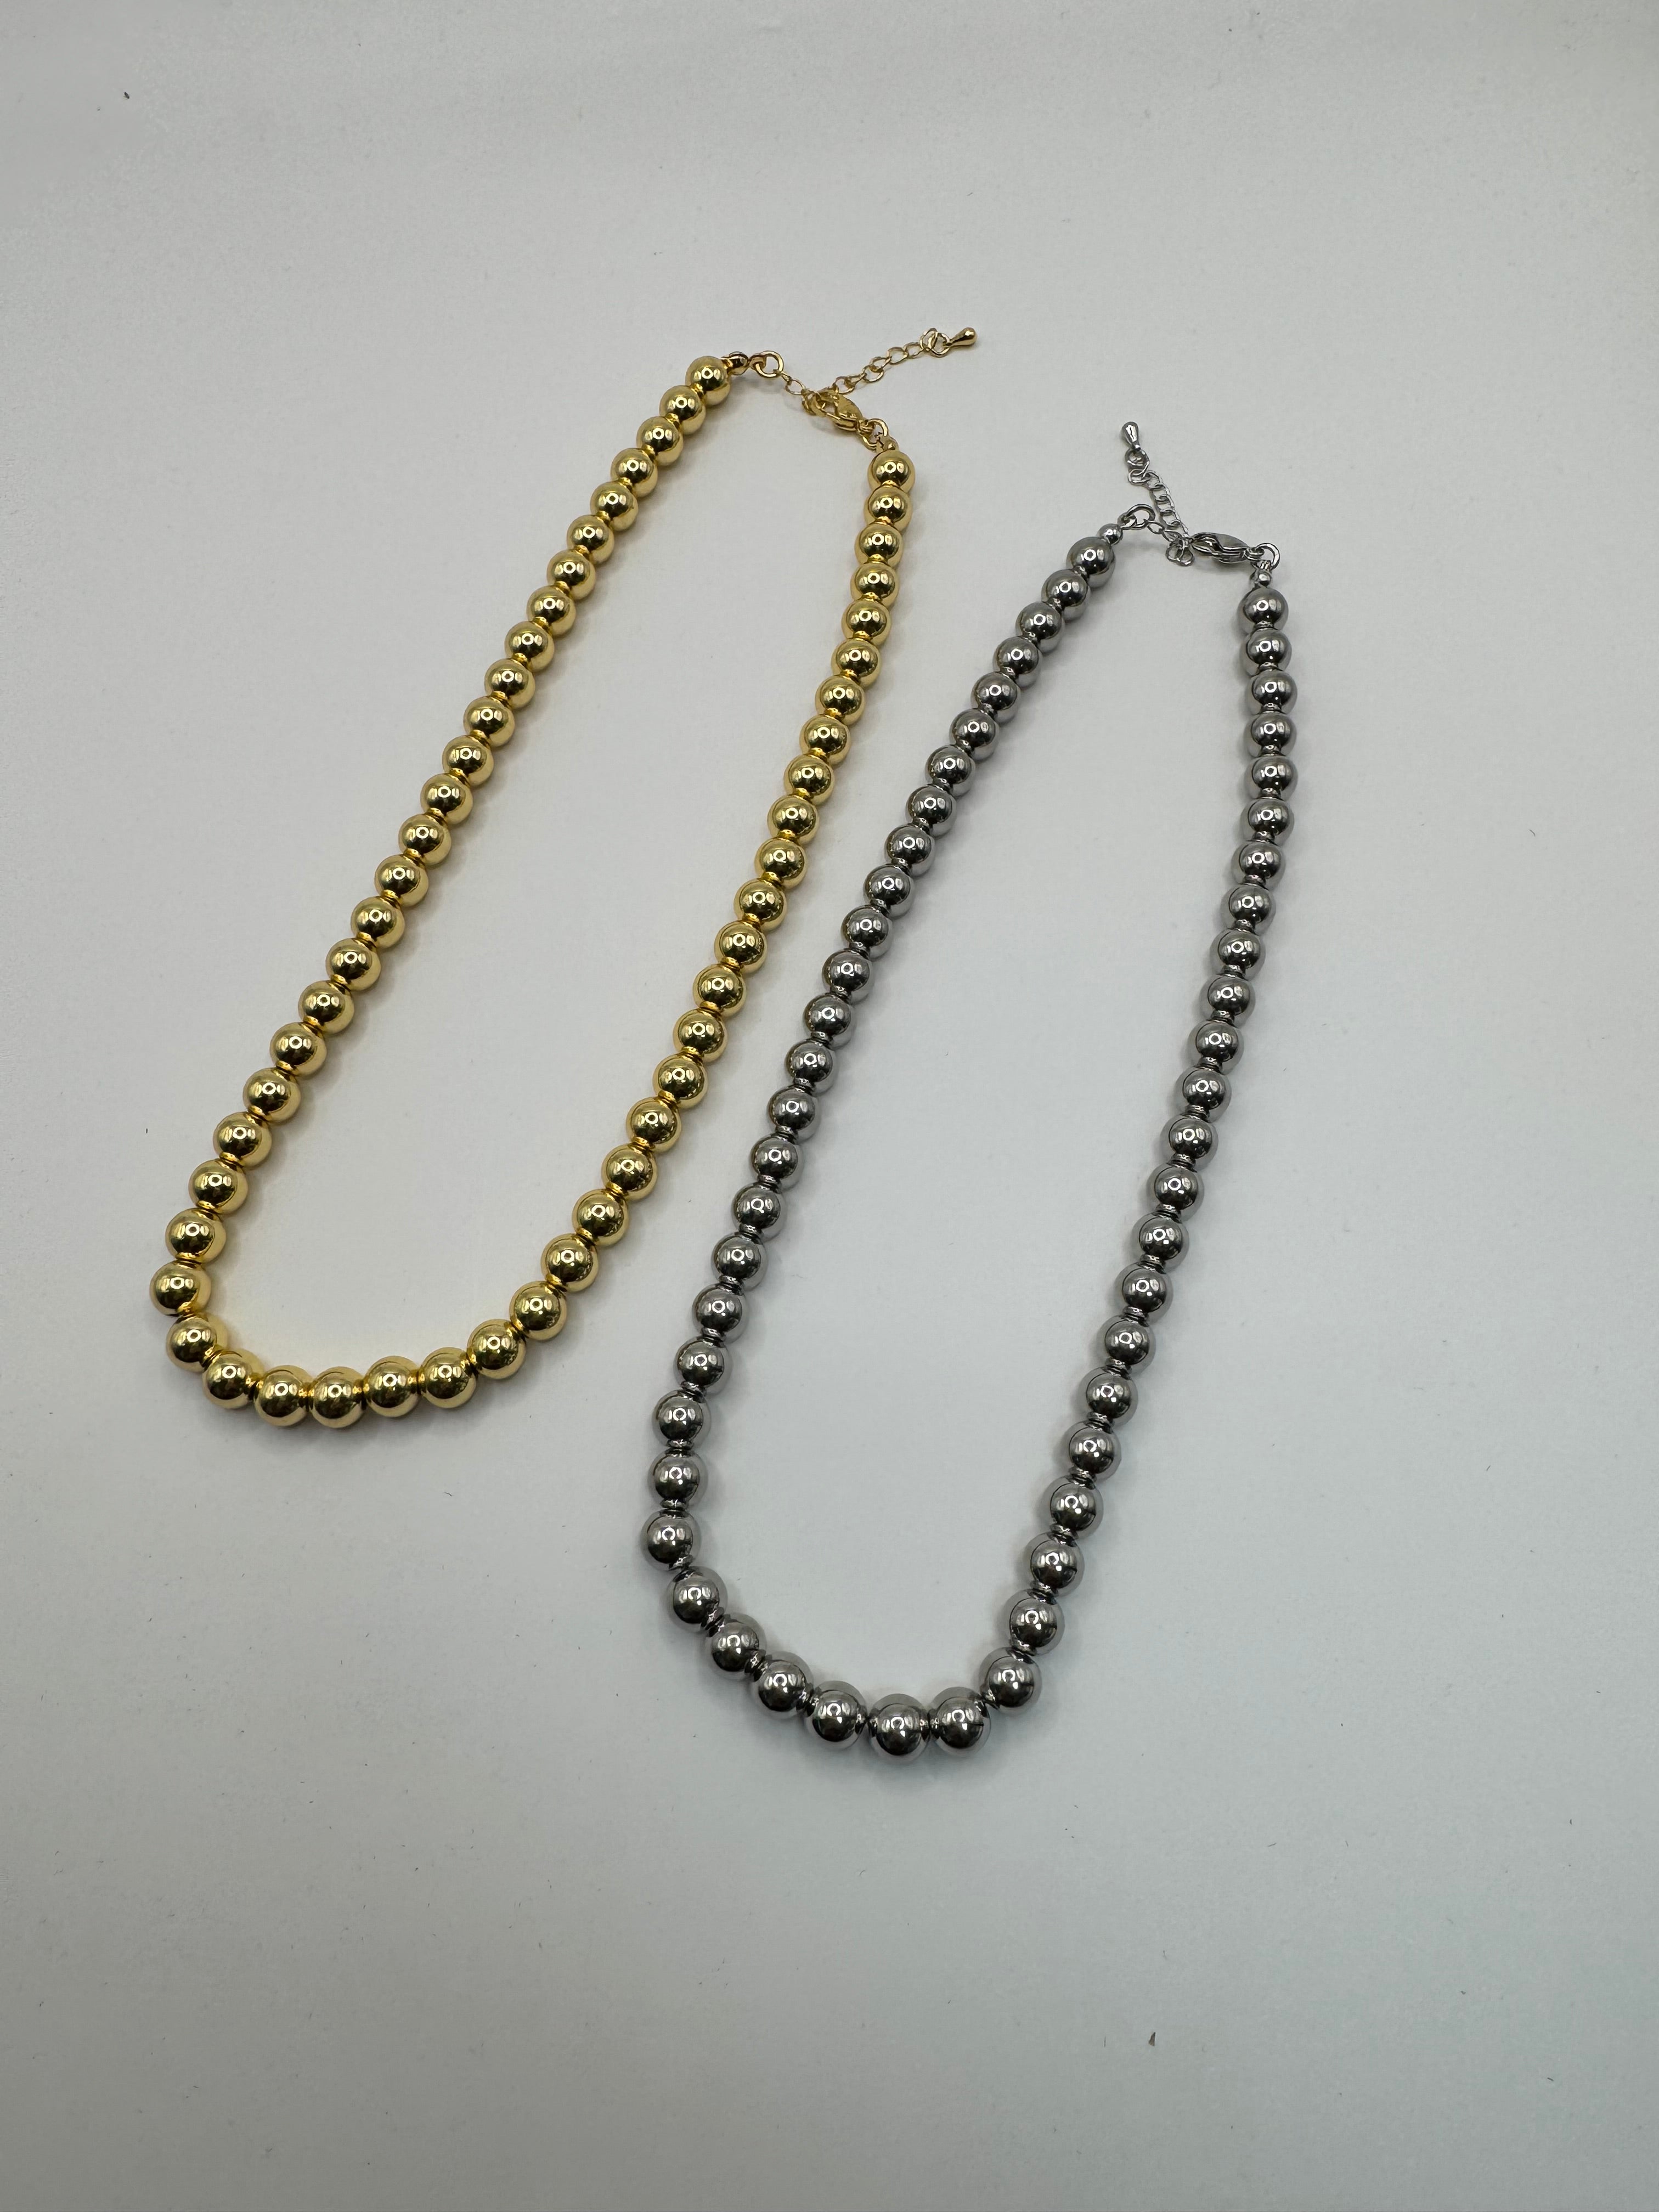 8mm bead necklace (silver and gold!)